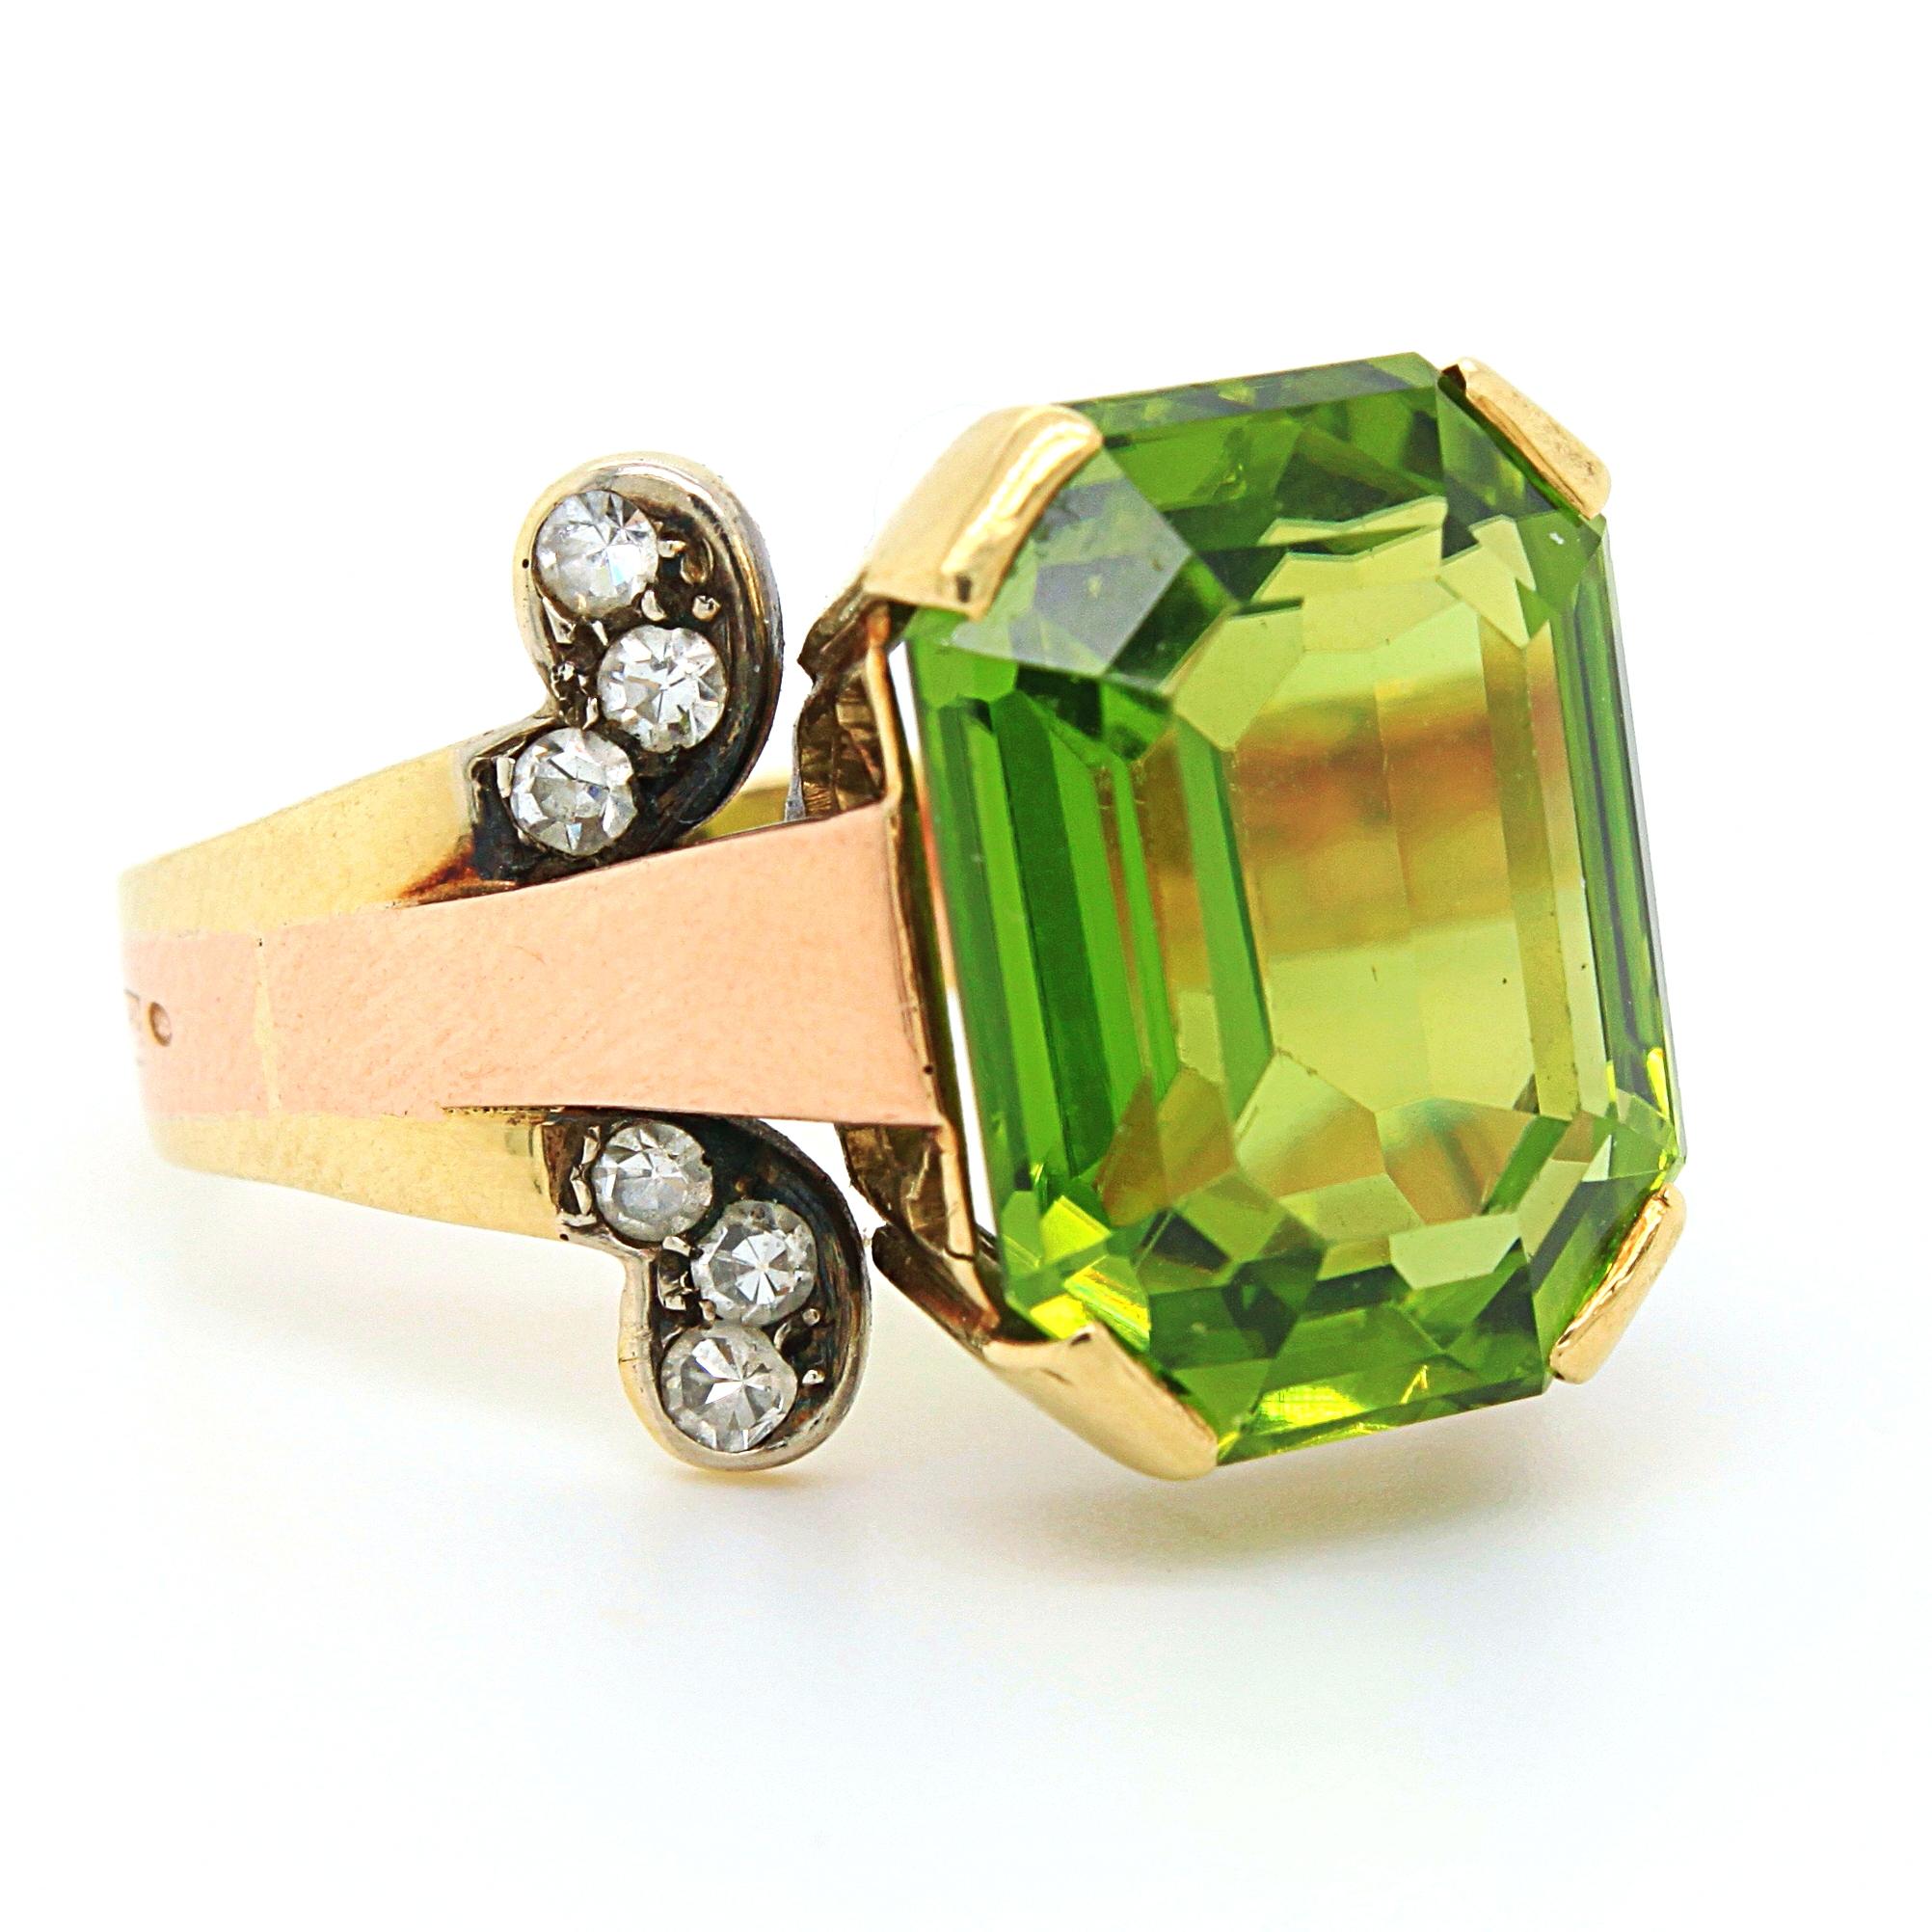 Emerald Cut Vivid Peridot and Diamond Ring in Yellow and Red Gold, ca. 1950s